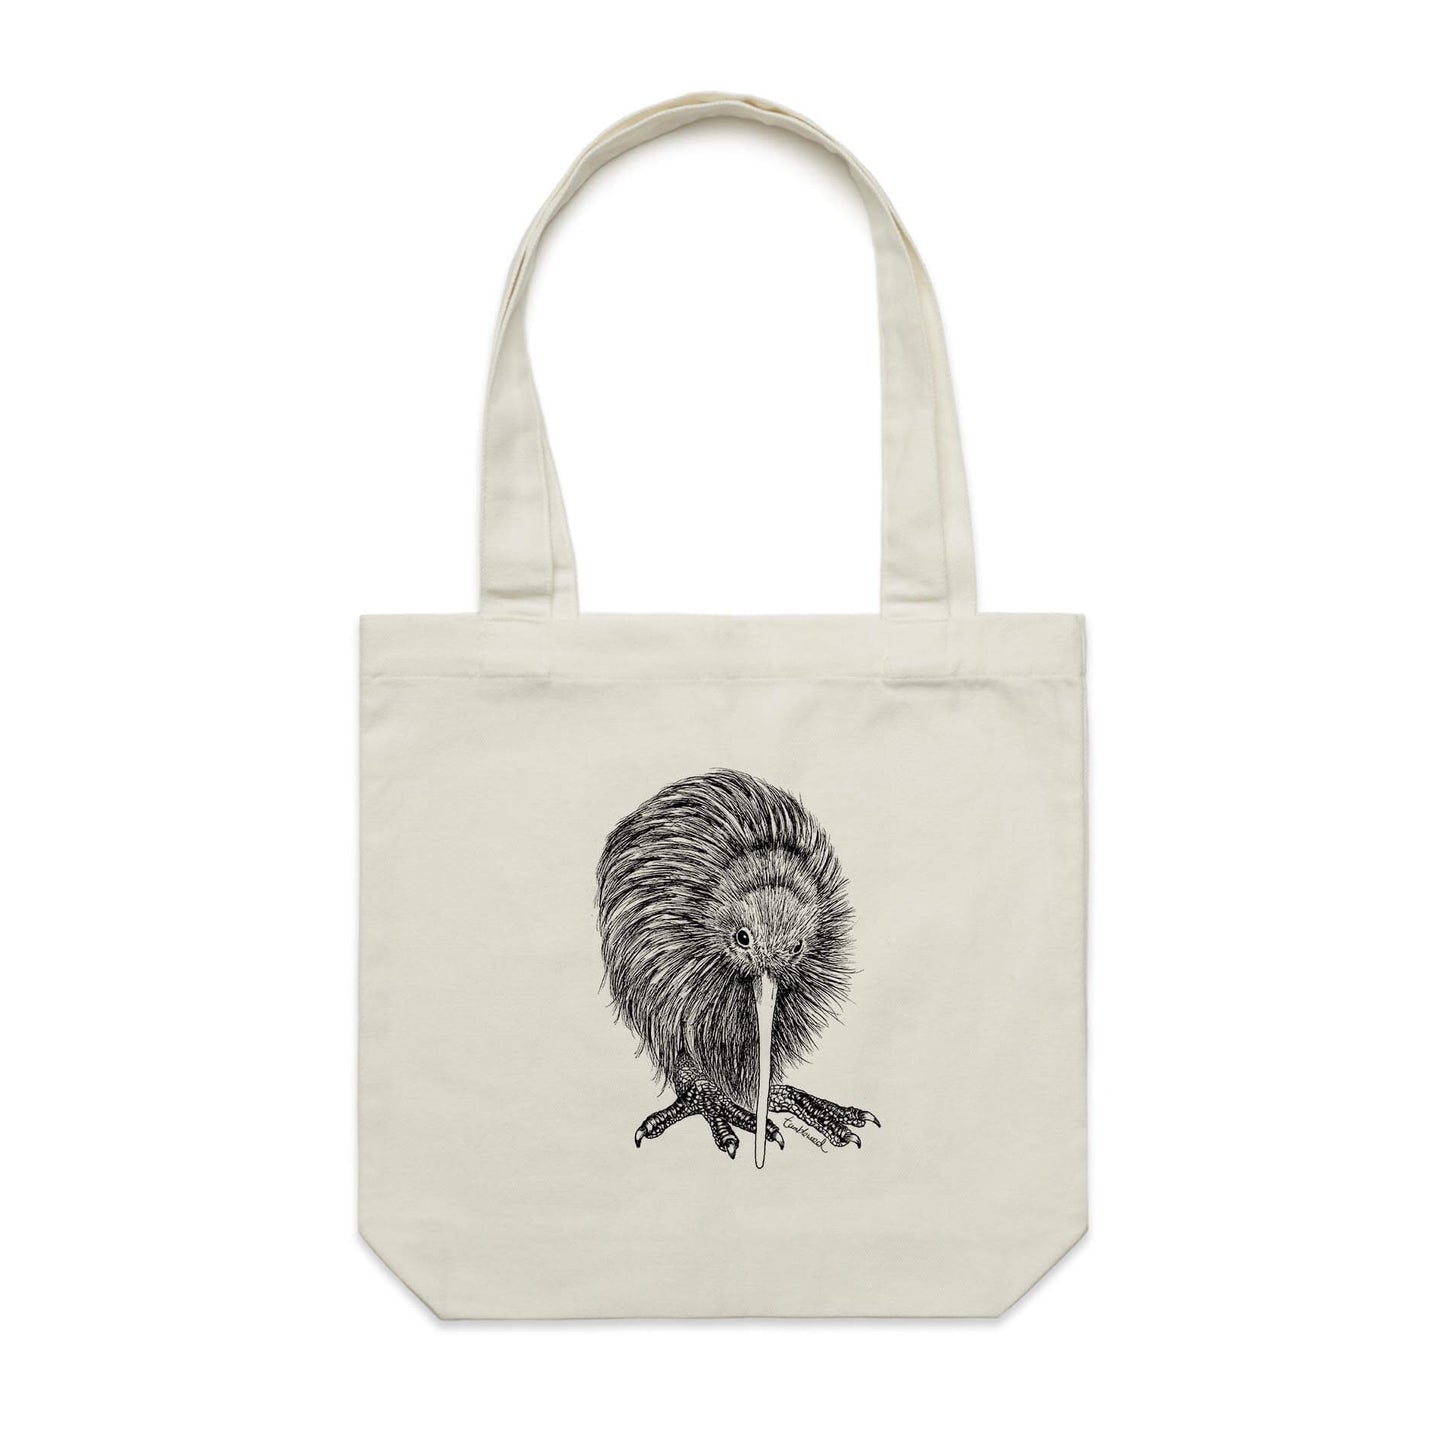 Cotton canvas tote bag with a screen printed Kiwi design.